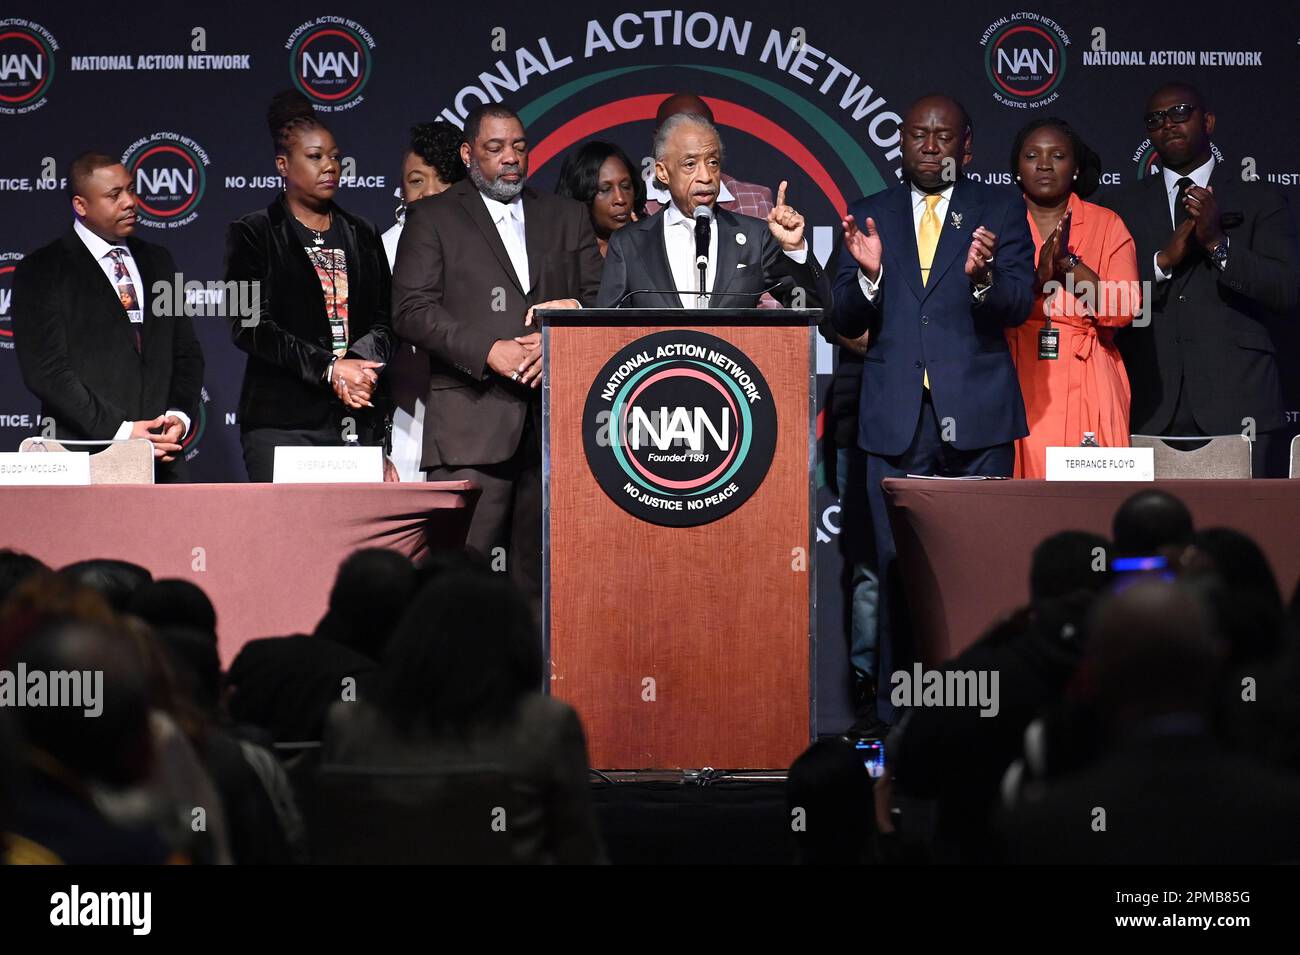 New York, USA. 12th Apr, 2023. (L-R) Andre Locke Sr., father of Amir Locke, Sybrina Fulton, mother of Trayvon Martin, Gwen Carr, mother of Eric Garner, Rodney Wells, step-father of Tyre Nichols, RowVaughn Wells, mother of Tyre Nichols, Philonise Floyd, brother of George Floyd, Rev. Al Sharpton, Attorney Benjamin Crump, Wanda Cooper Jones, mother of Ahmaud Arbery, and guest attend the National Action Network (NAN) conference at the Sheraton Hotel, New York, NY, April 12, 2023. (Photo by Anthony Behar/Sipa USA) Credit: Sipa USA/Alamy Live News Stock Photo